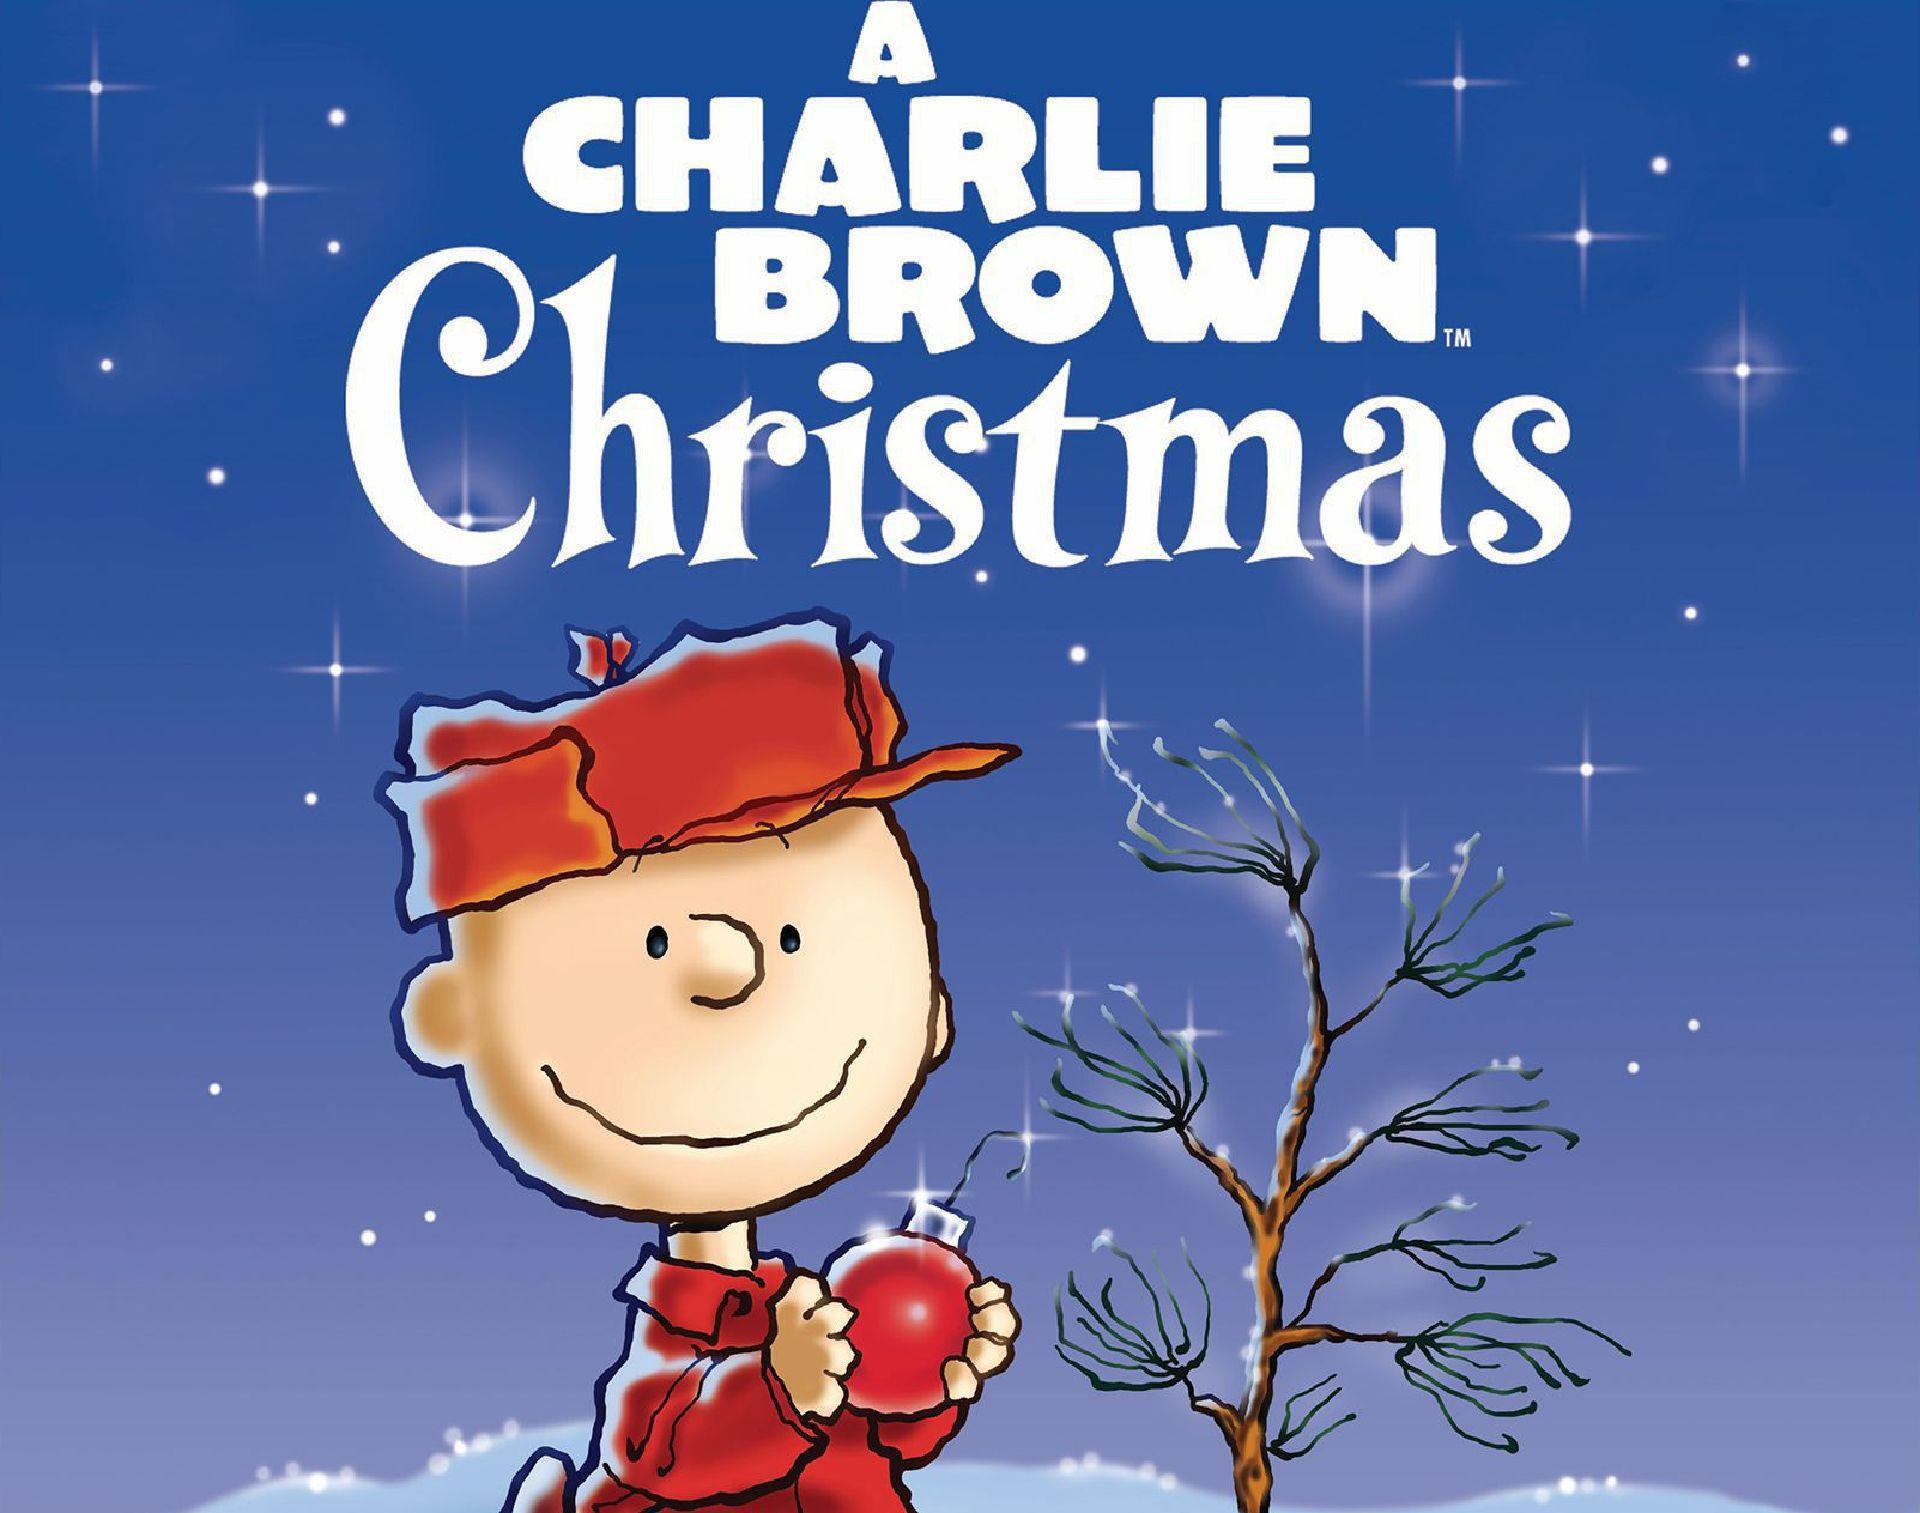 A Charlie Brown Christmas Wallpaper Image Photo Picture Background